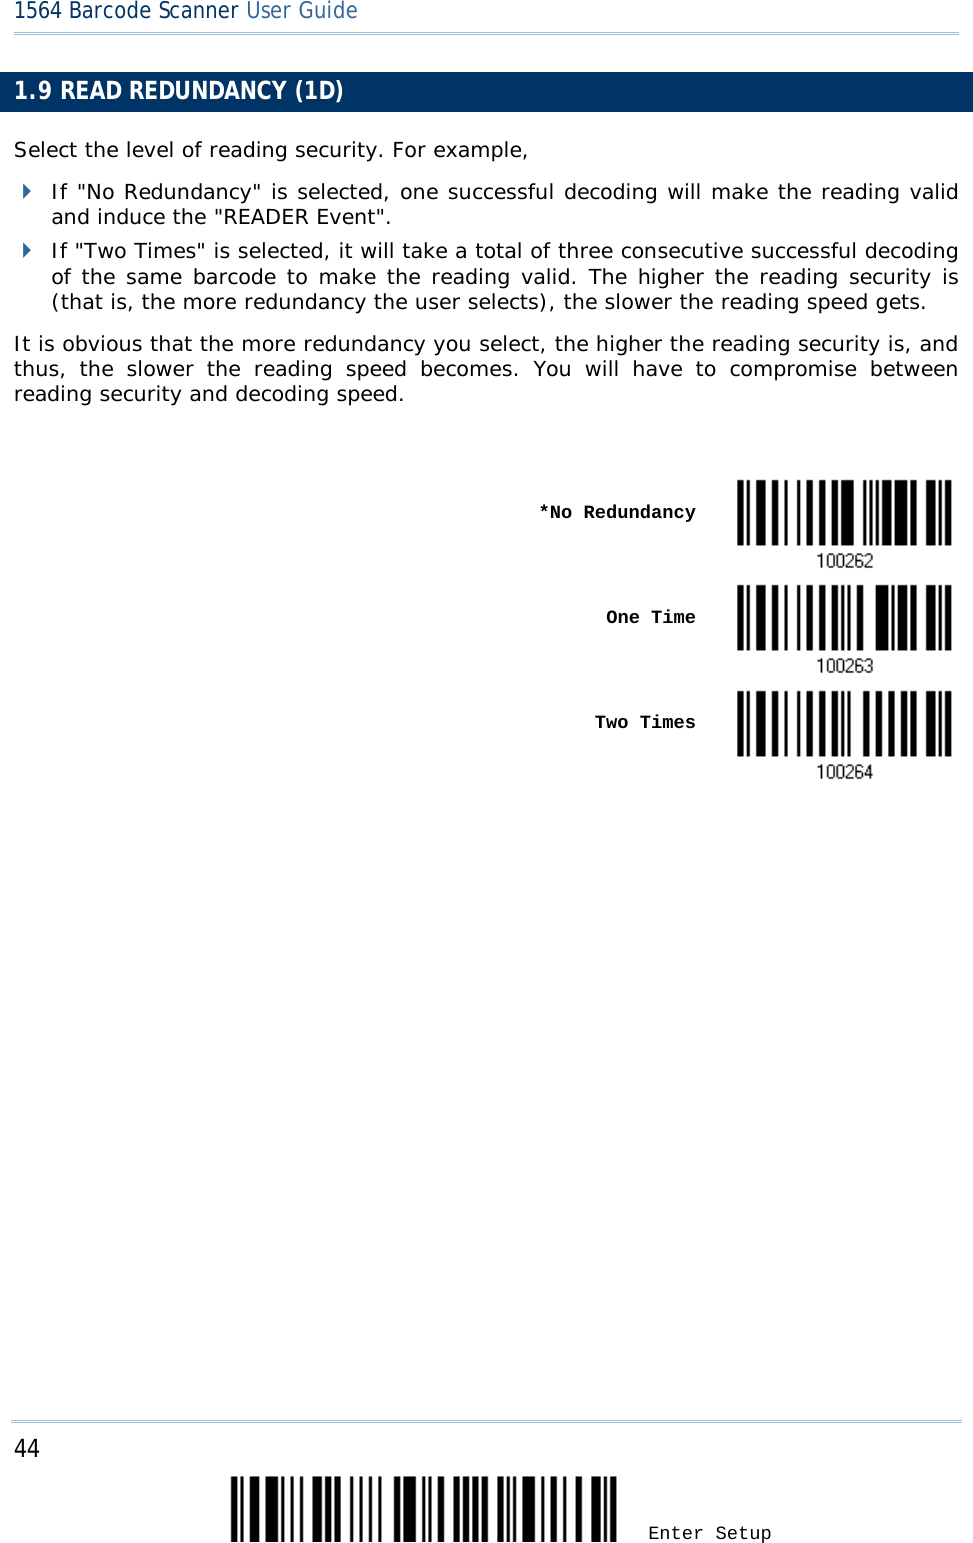 44 Enter Setup 1564 Barcode Scanner User Guide  1.9 READ REDUNDANCY (1D) Select the level of reading security. For example,  If &quot;No Redundancy&quot; is selected, one successful decoding will make the reading valid and induce the &quot;READER Event&quot;.  If &quot;Two Times&quot; is selected, it will take a total of three consecutive successful decoding of the same barcode to make the reading valid. The higher the reading security is (that is, the more redundancy the user selects), the slower the reading speed gets.  It is obvious that the more redundancy you select, the higher the reading security is, and thus, the slower the reading speed becomes. You will have to compromise between reading security and decoding speed.       *No Redundancy     One Time       Two Times                            